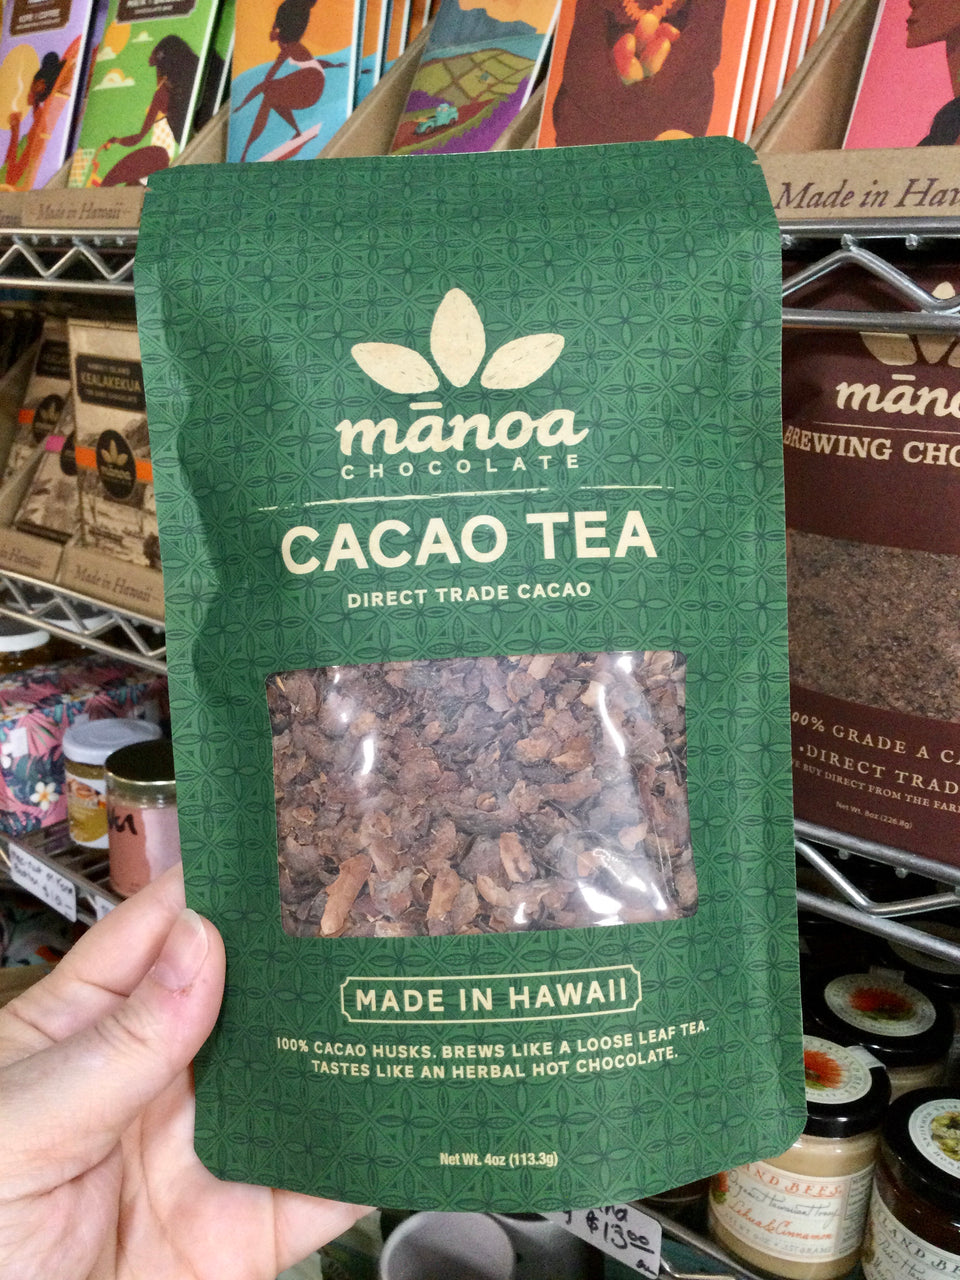 Package of Manoa cacao tea - front